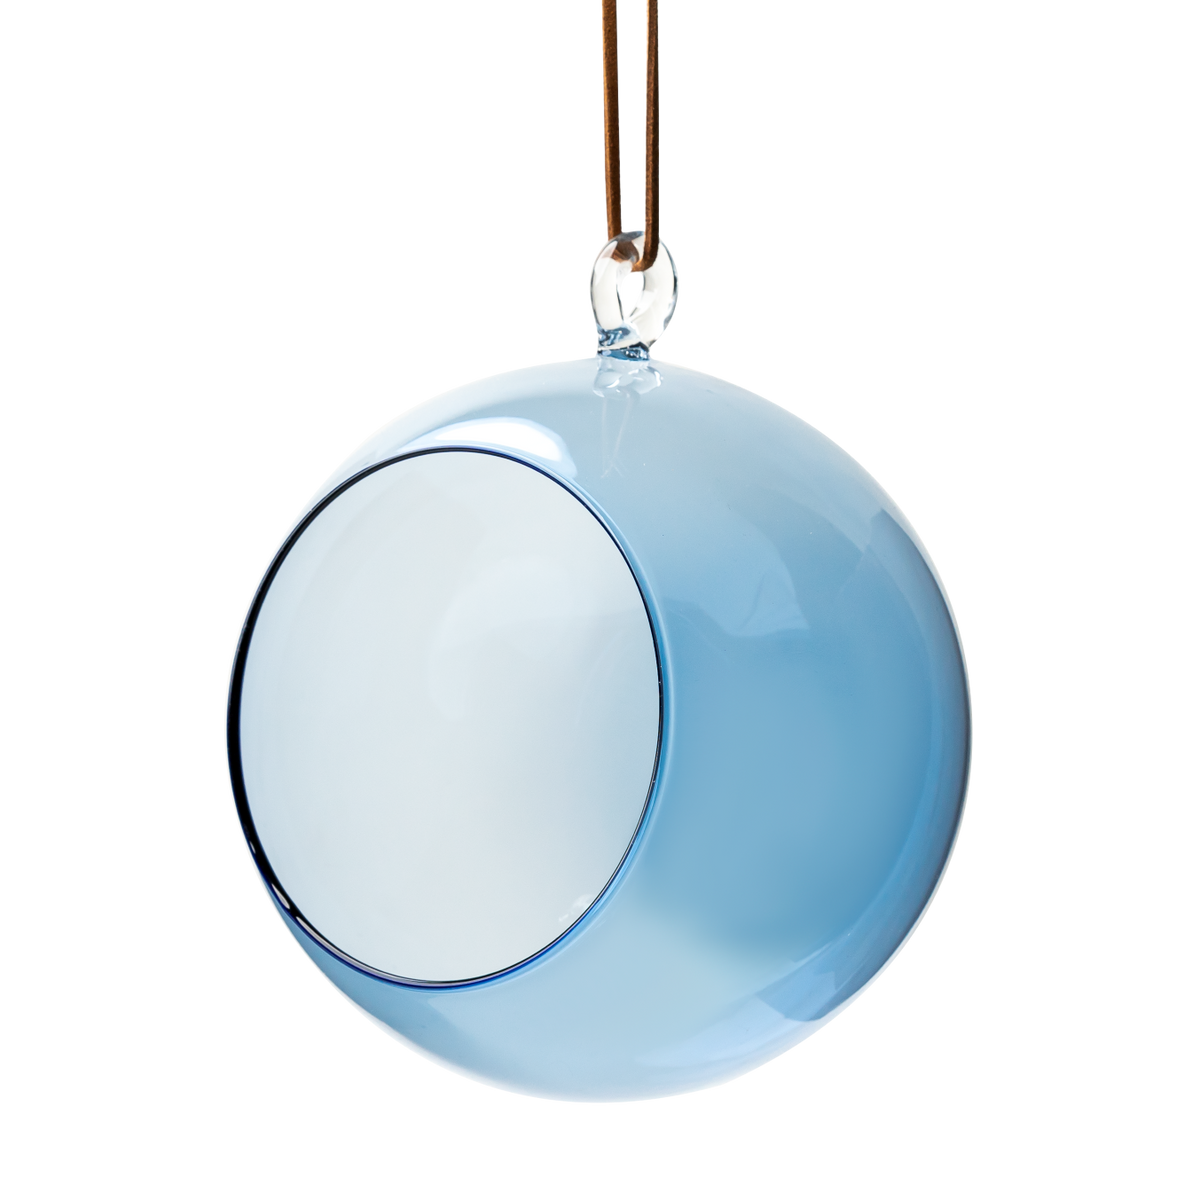 Muurla Decoration Ball 12cm in Blue. For tea-lights, decorations of small plants